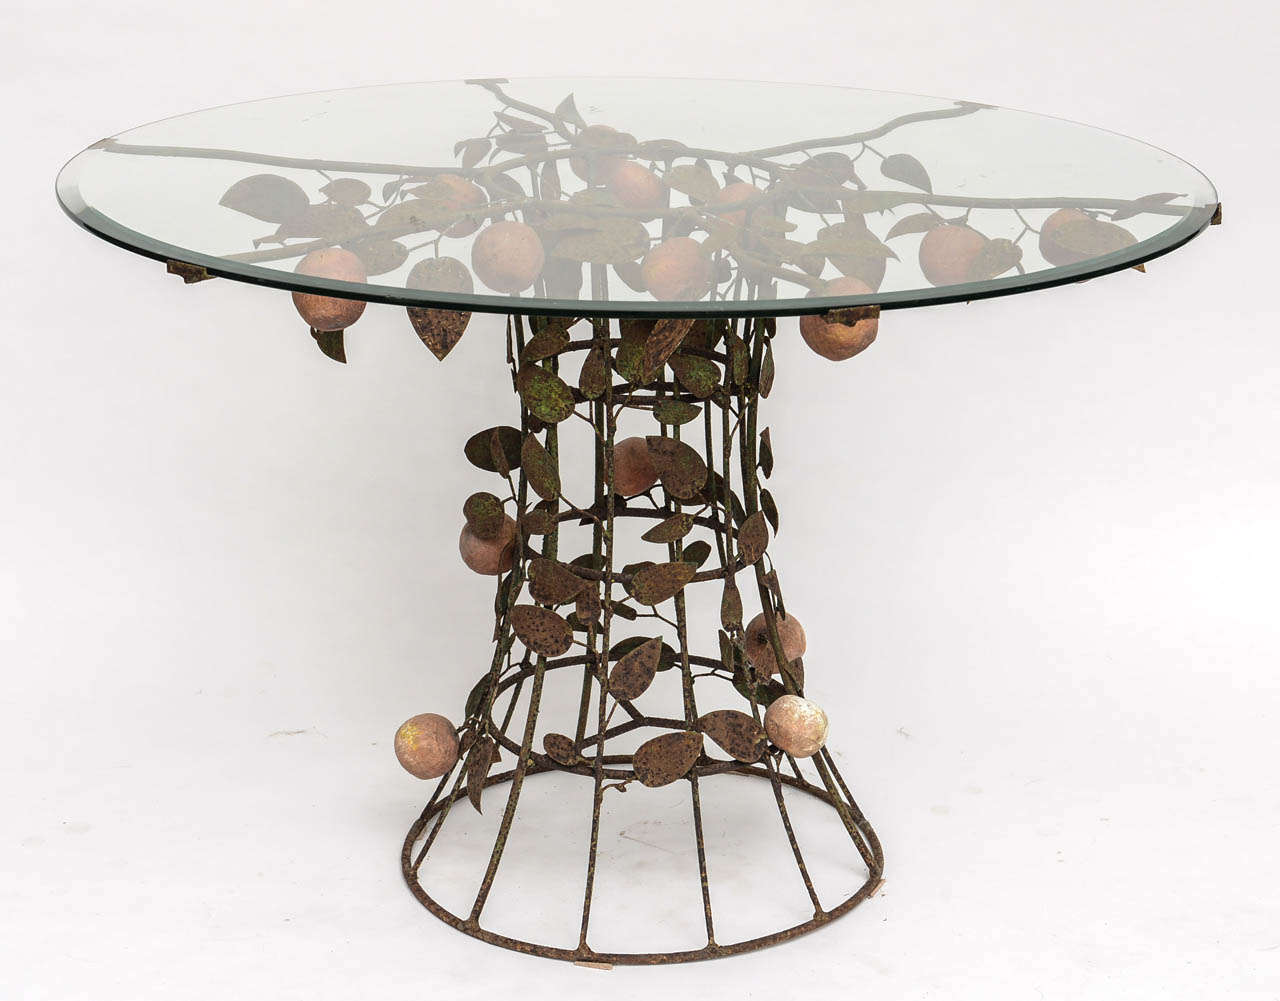 Painted  1950's metal fruit table with wonderful patina.